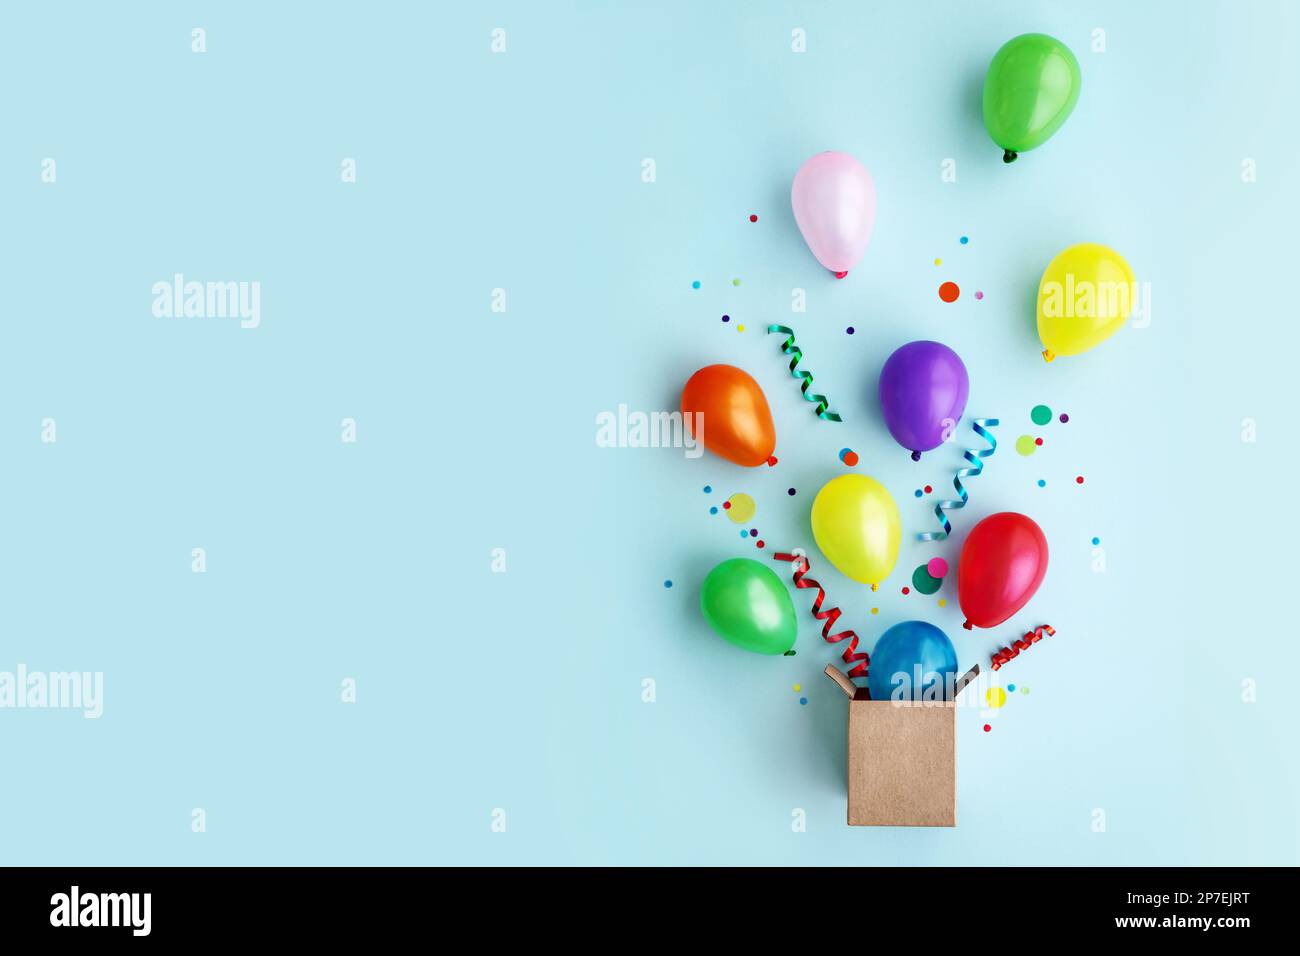 Birthday party flat lay with colorful balloons and confetti escaping from a gift box Stock Photo